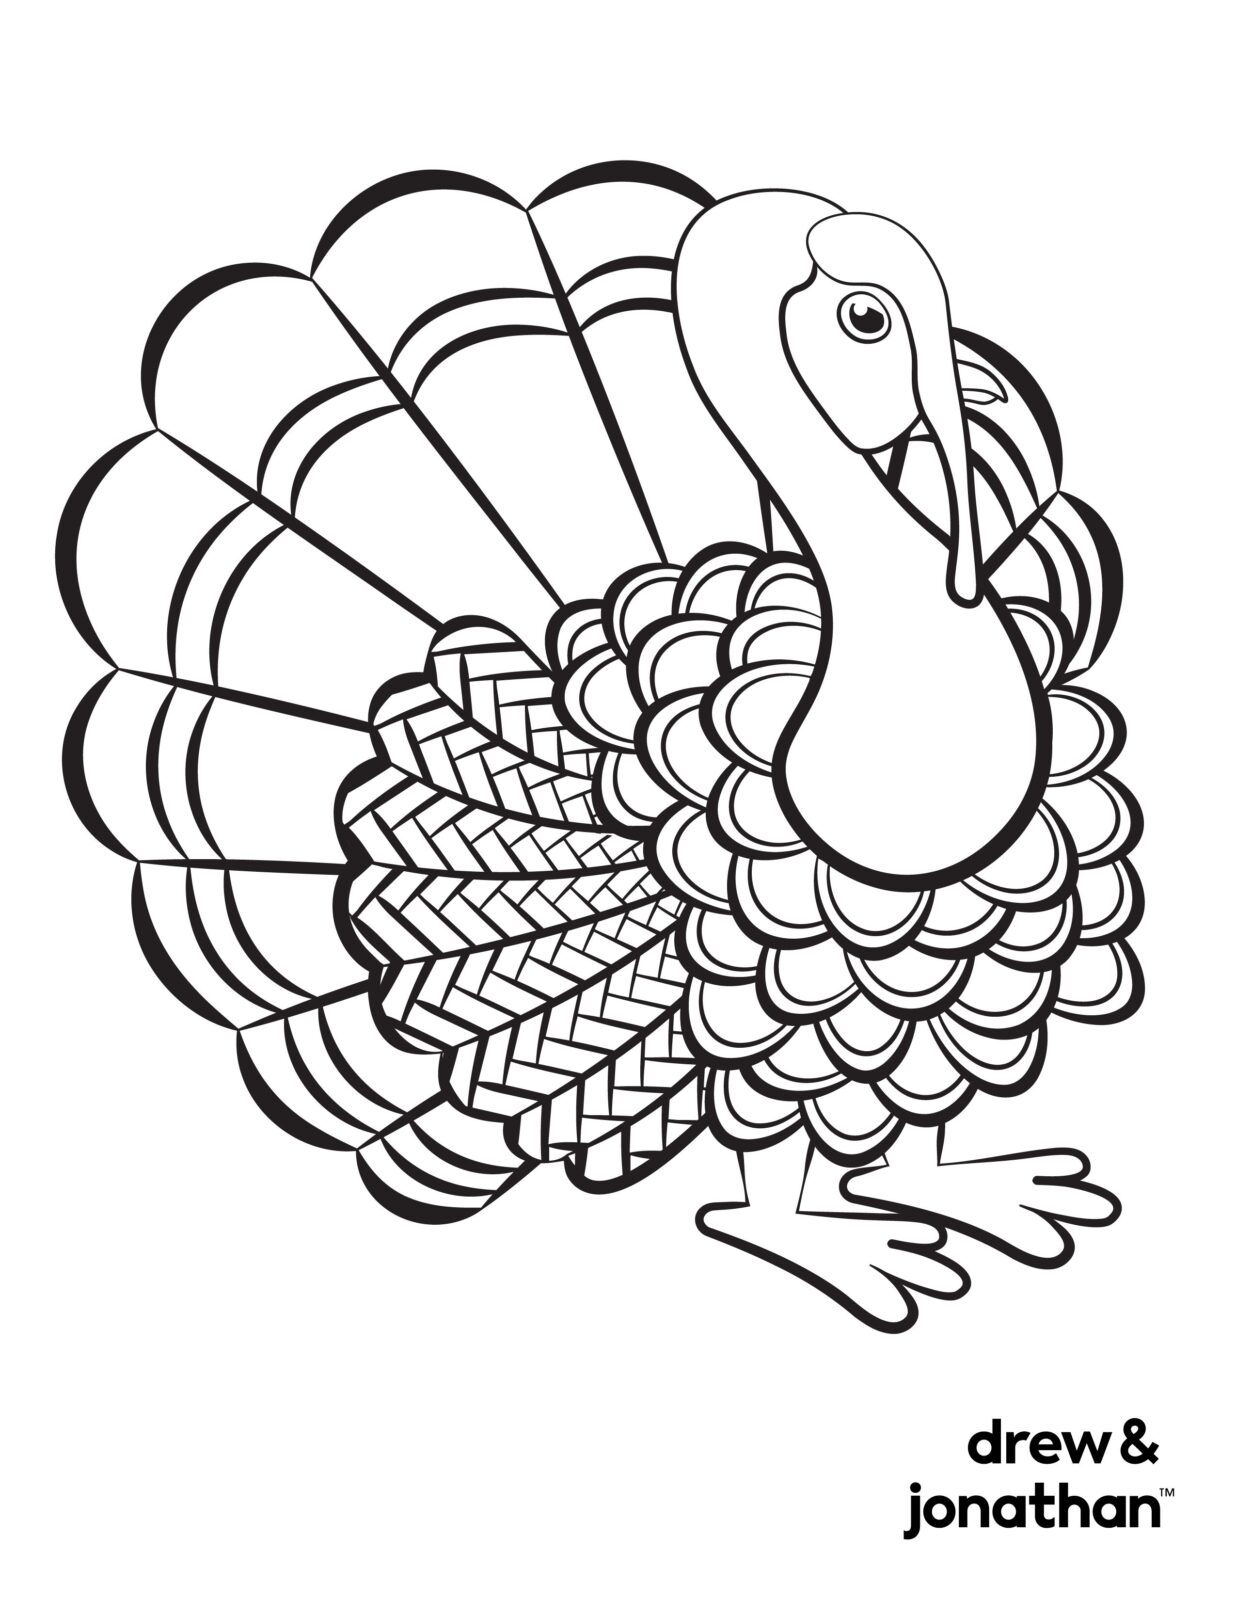 Turkey Craft Free Printable Coloring Page for Kids